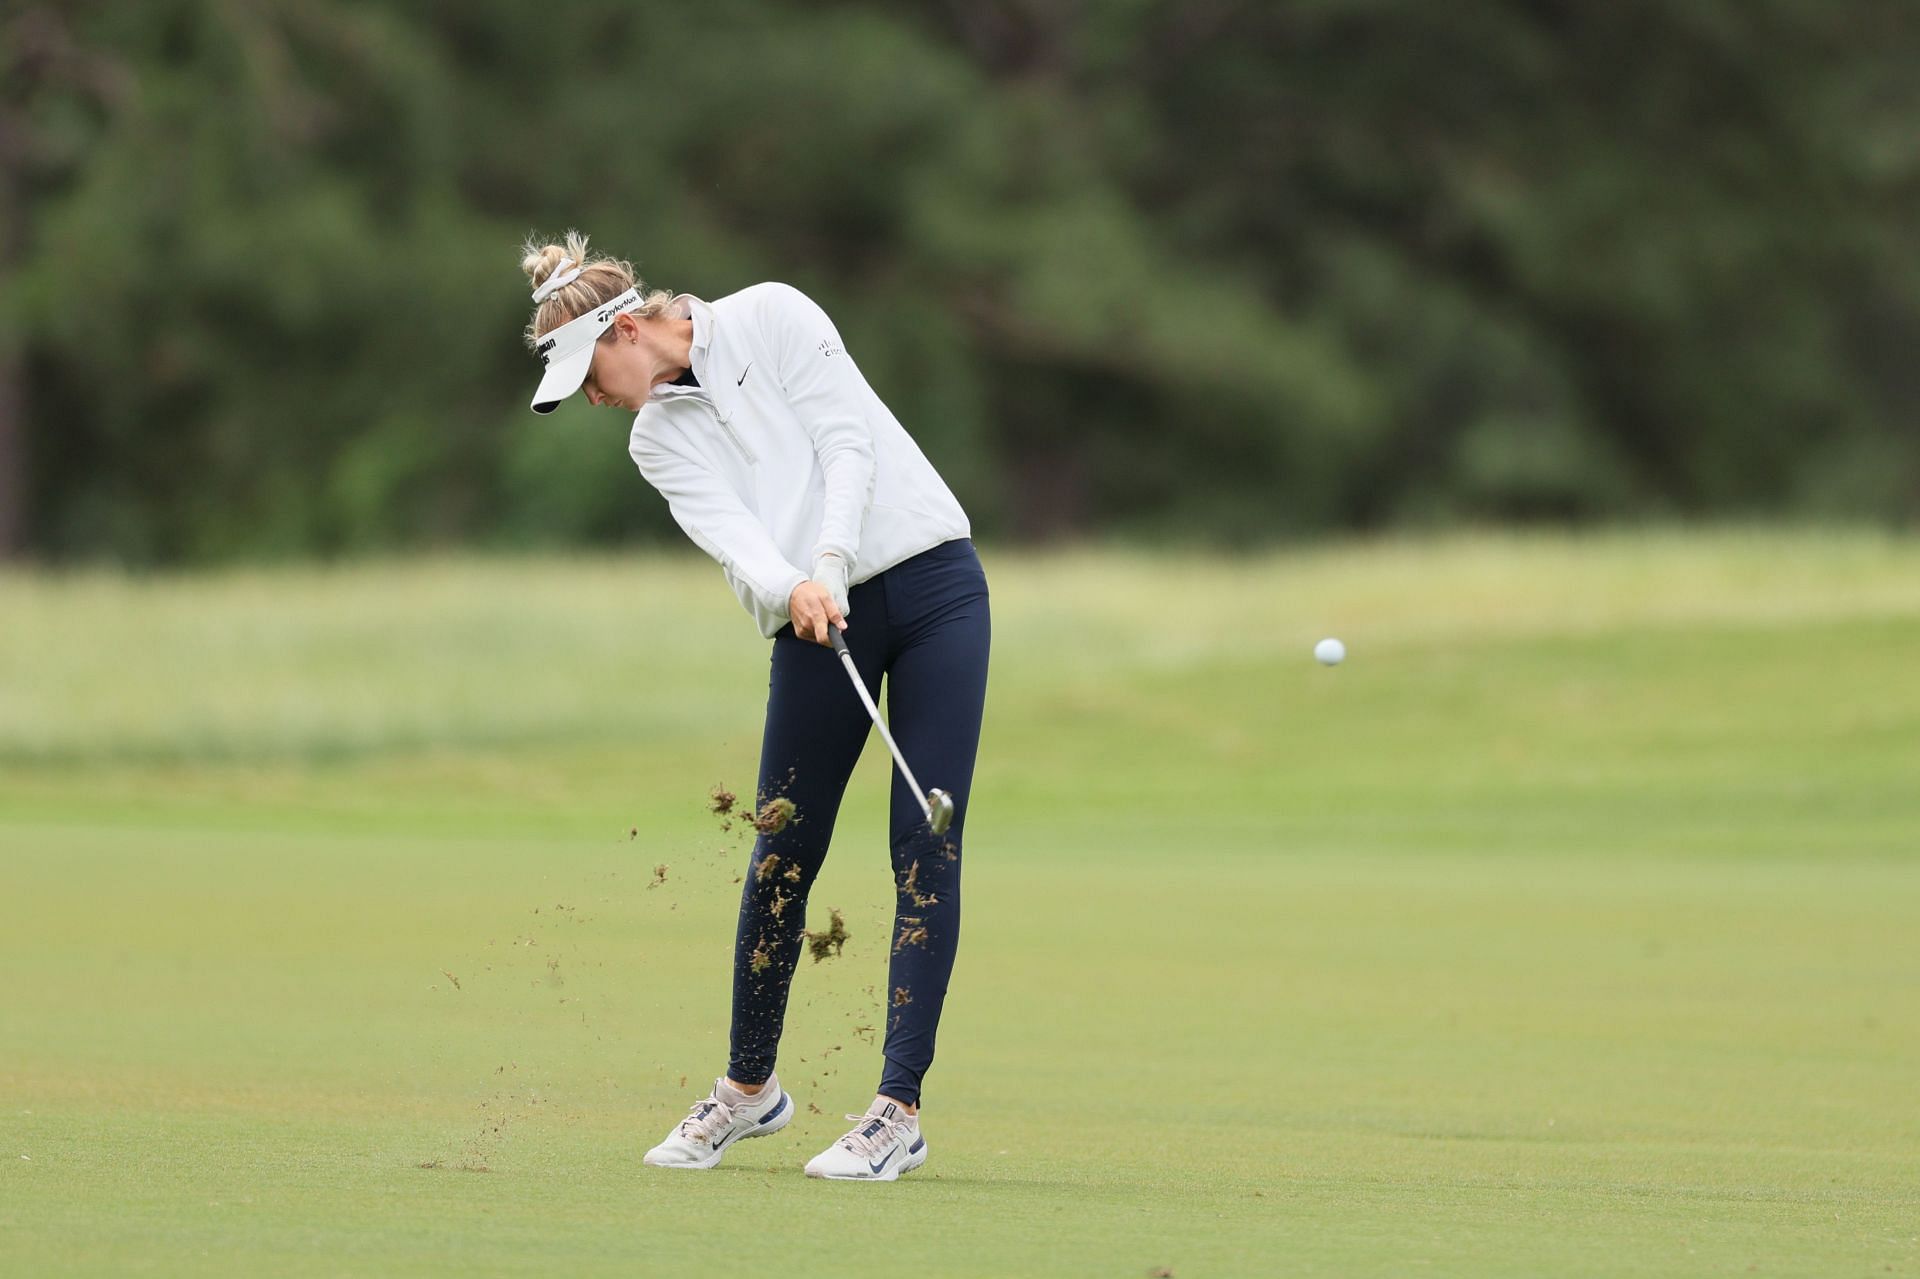 Nelly Korda has been impressive of late